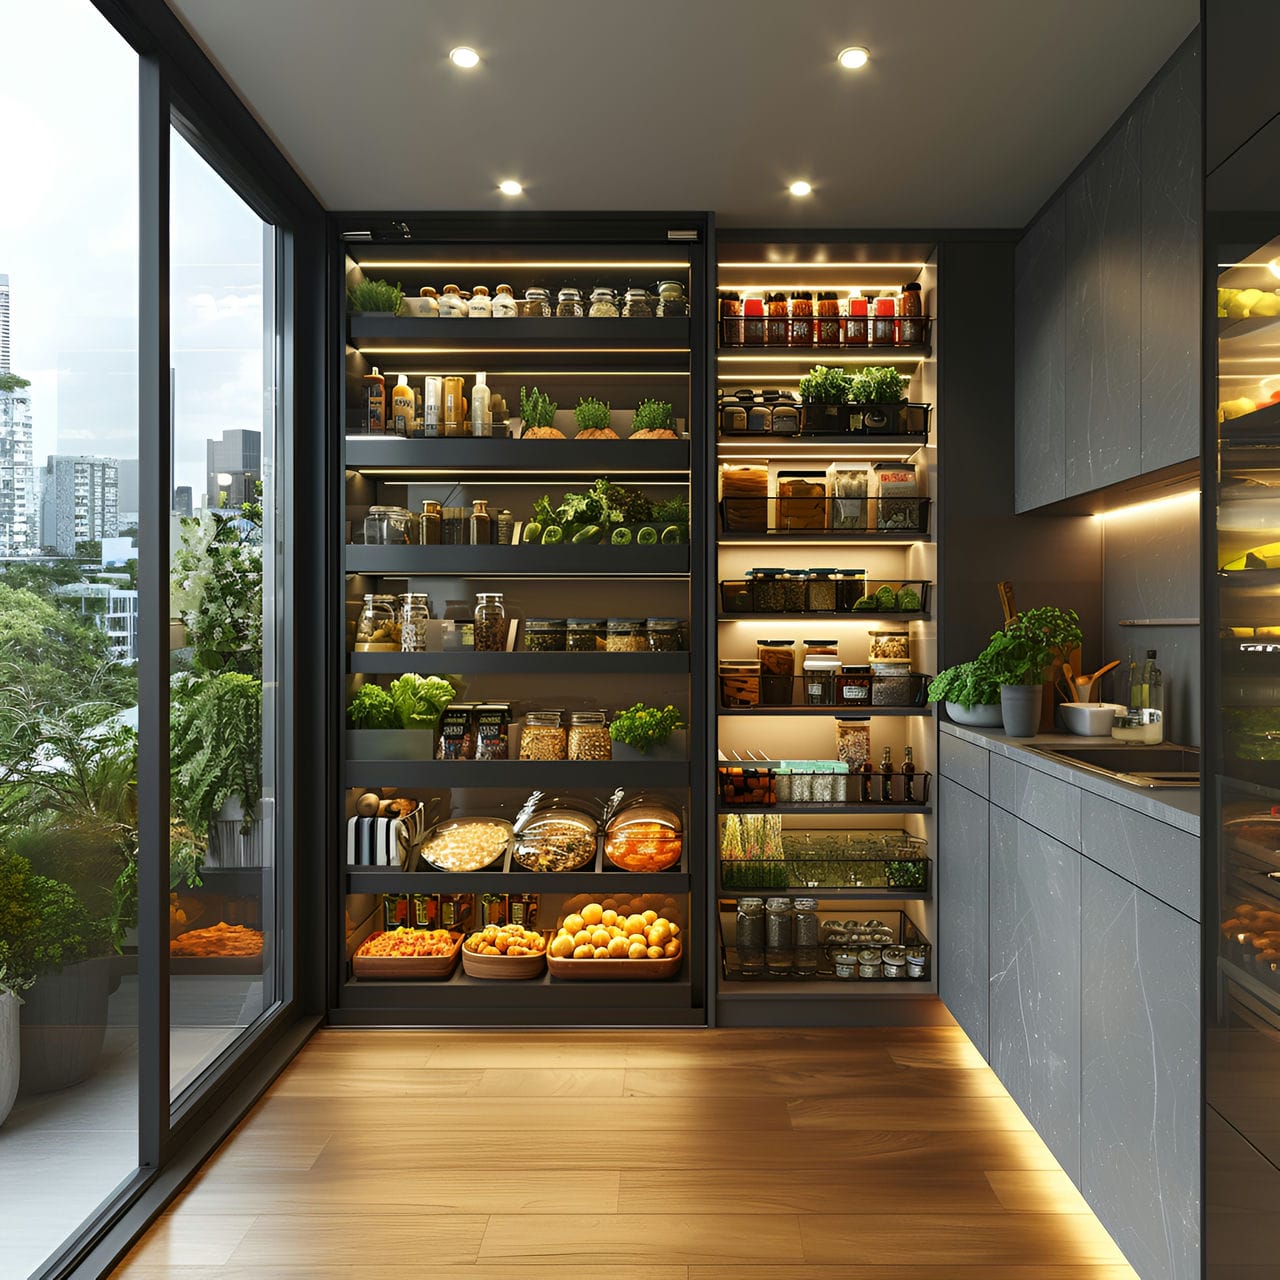 Pantry: size, functionality, uses, furniture and renovation